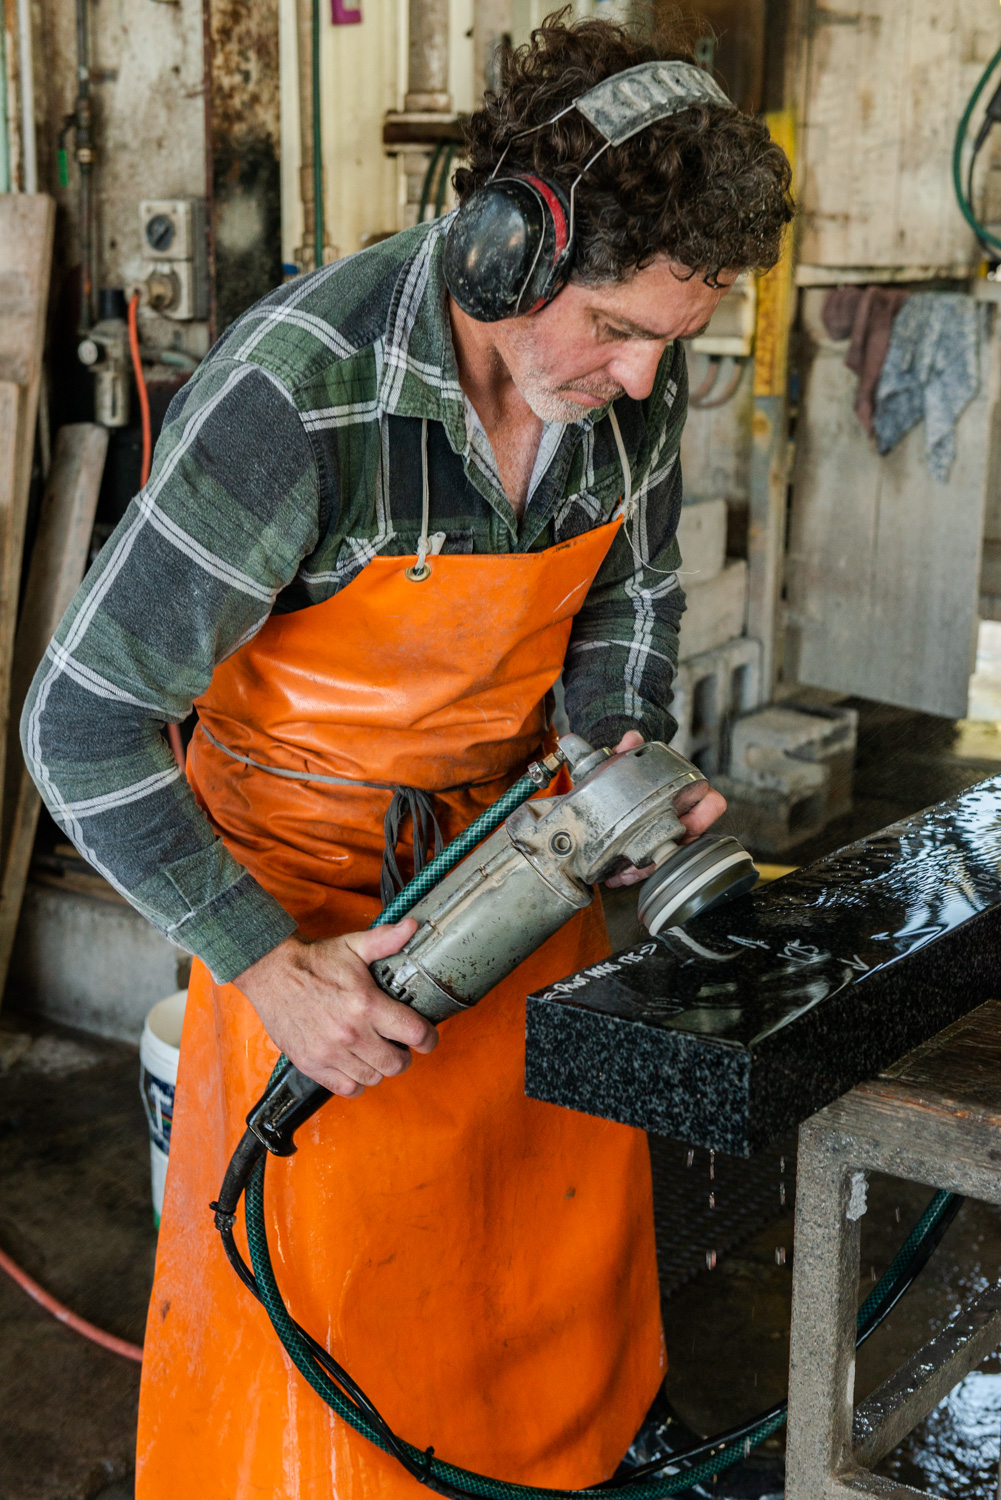 Our stonemasons use water at all times to reduce the risks of them developing silicosis.